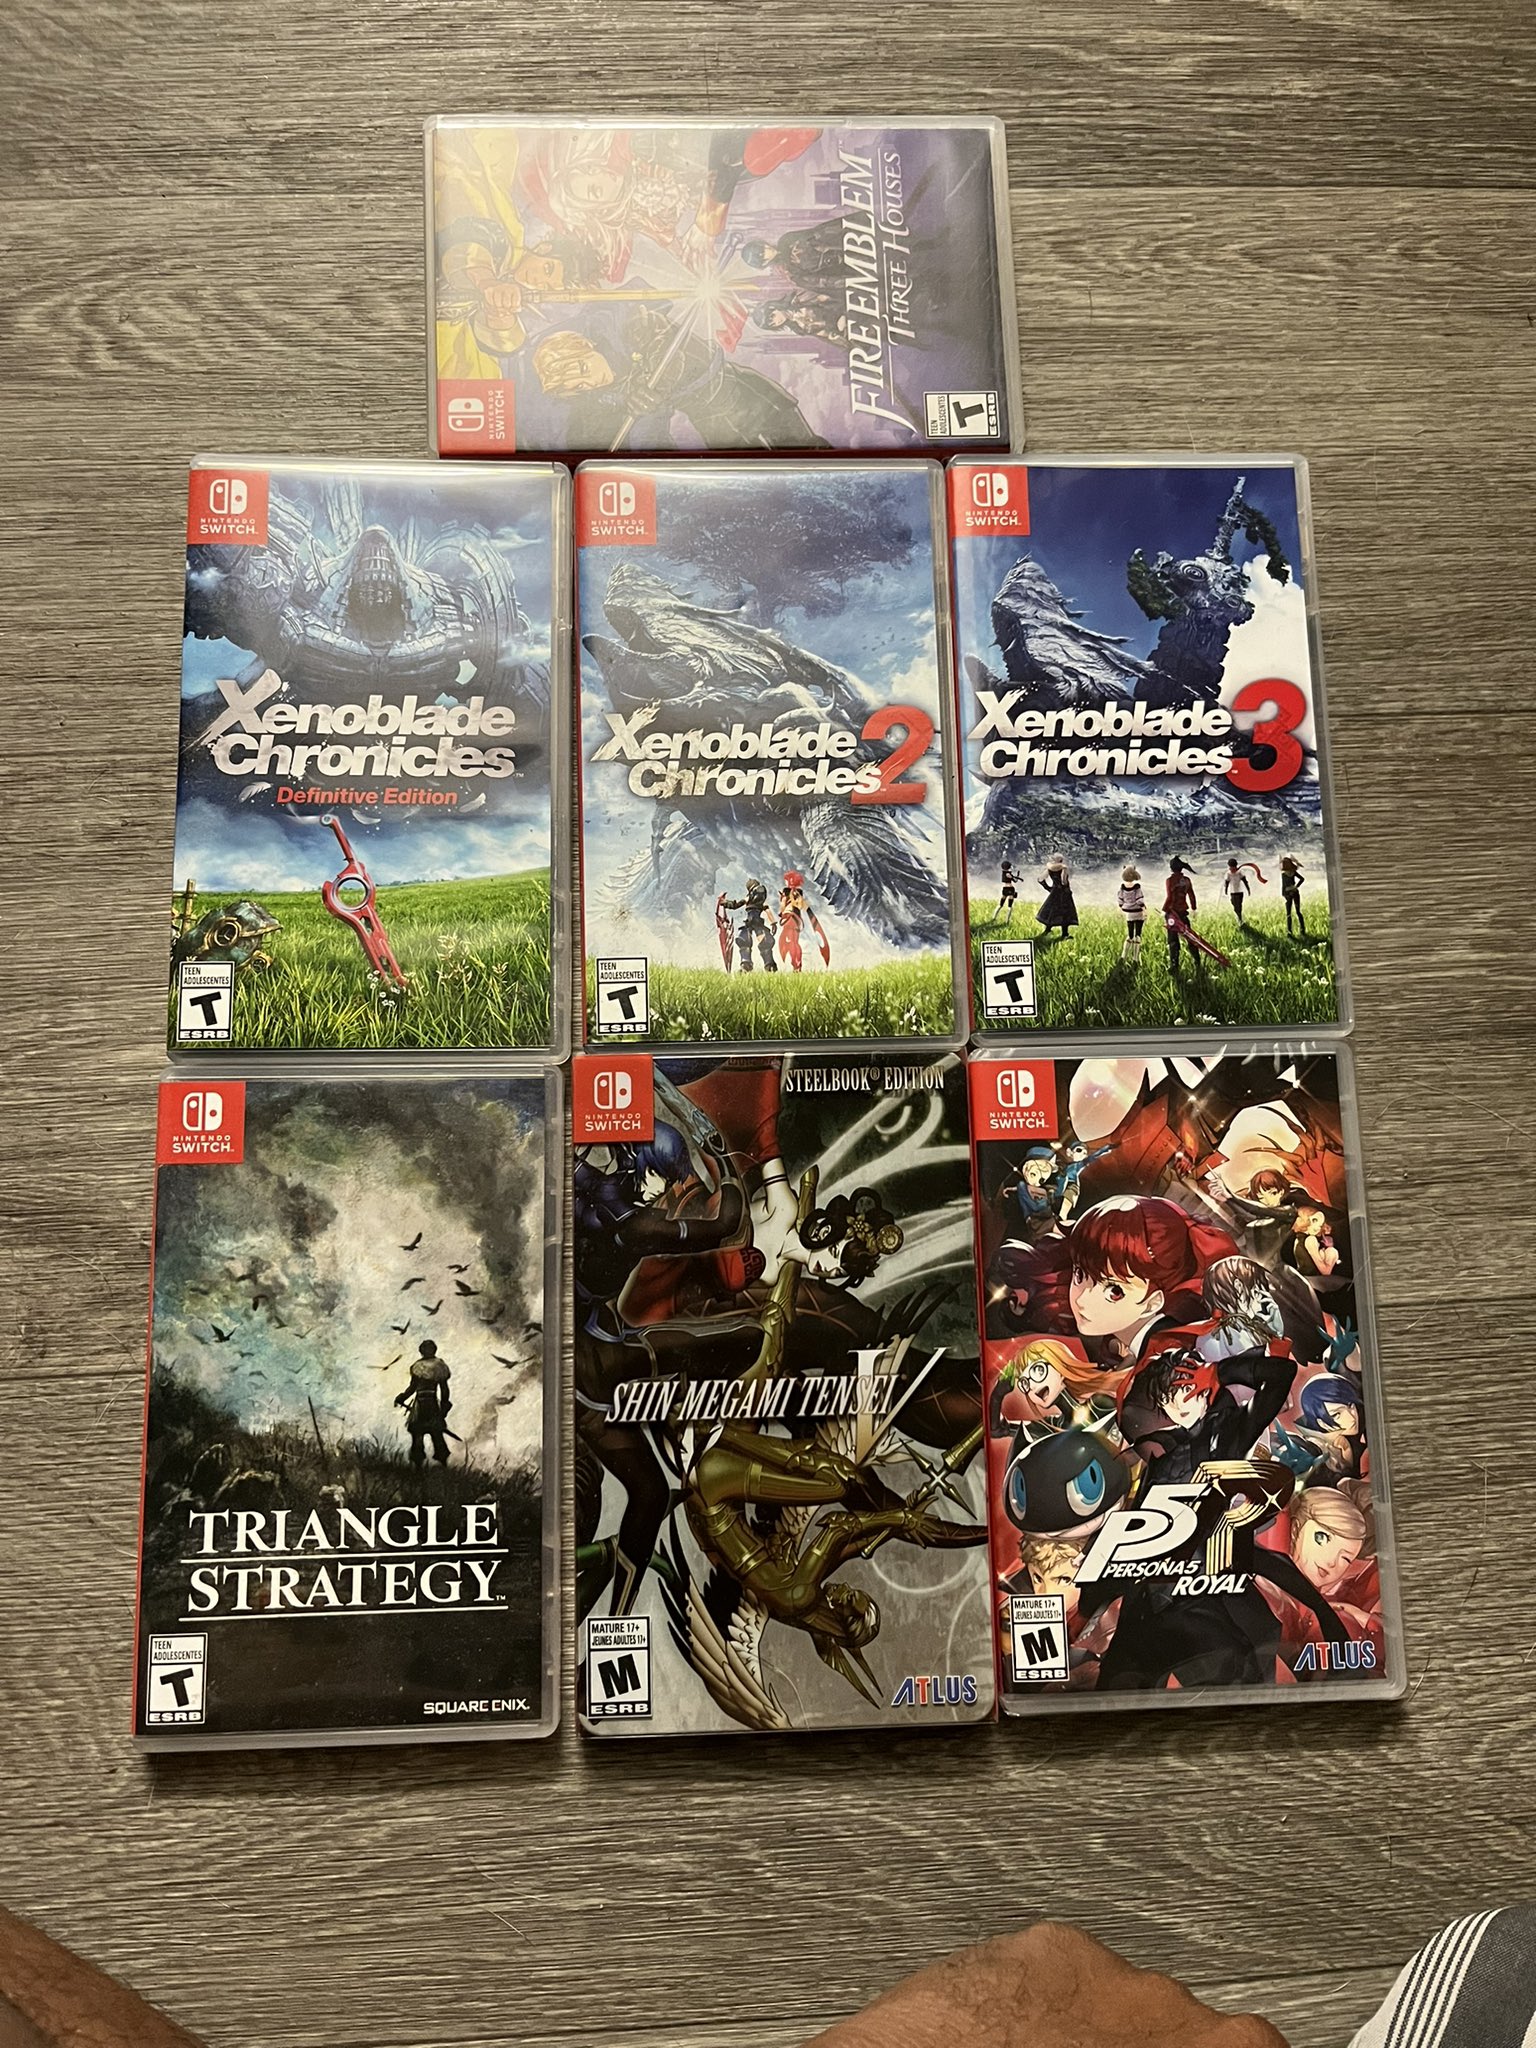 Forskel Melankoli Måler Kennedy Clark on Twitter: "No way you can love jrpgs and not have a Nintendo  switch. It's arguably the greatest jrpg console of all time.  https://t.co/TZiPdnUs0I" / Twitter